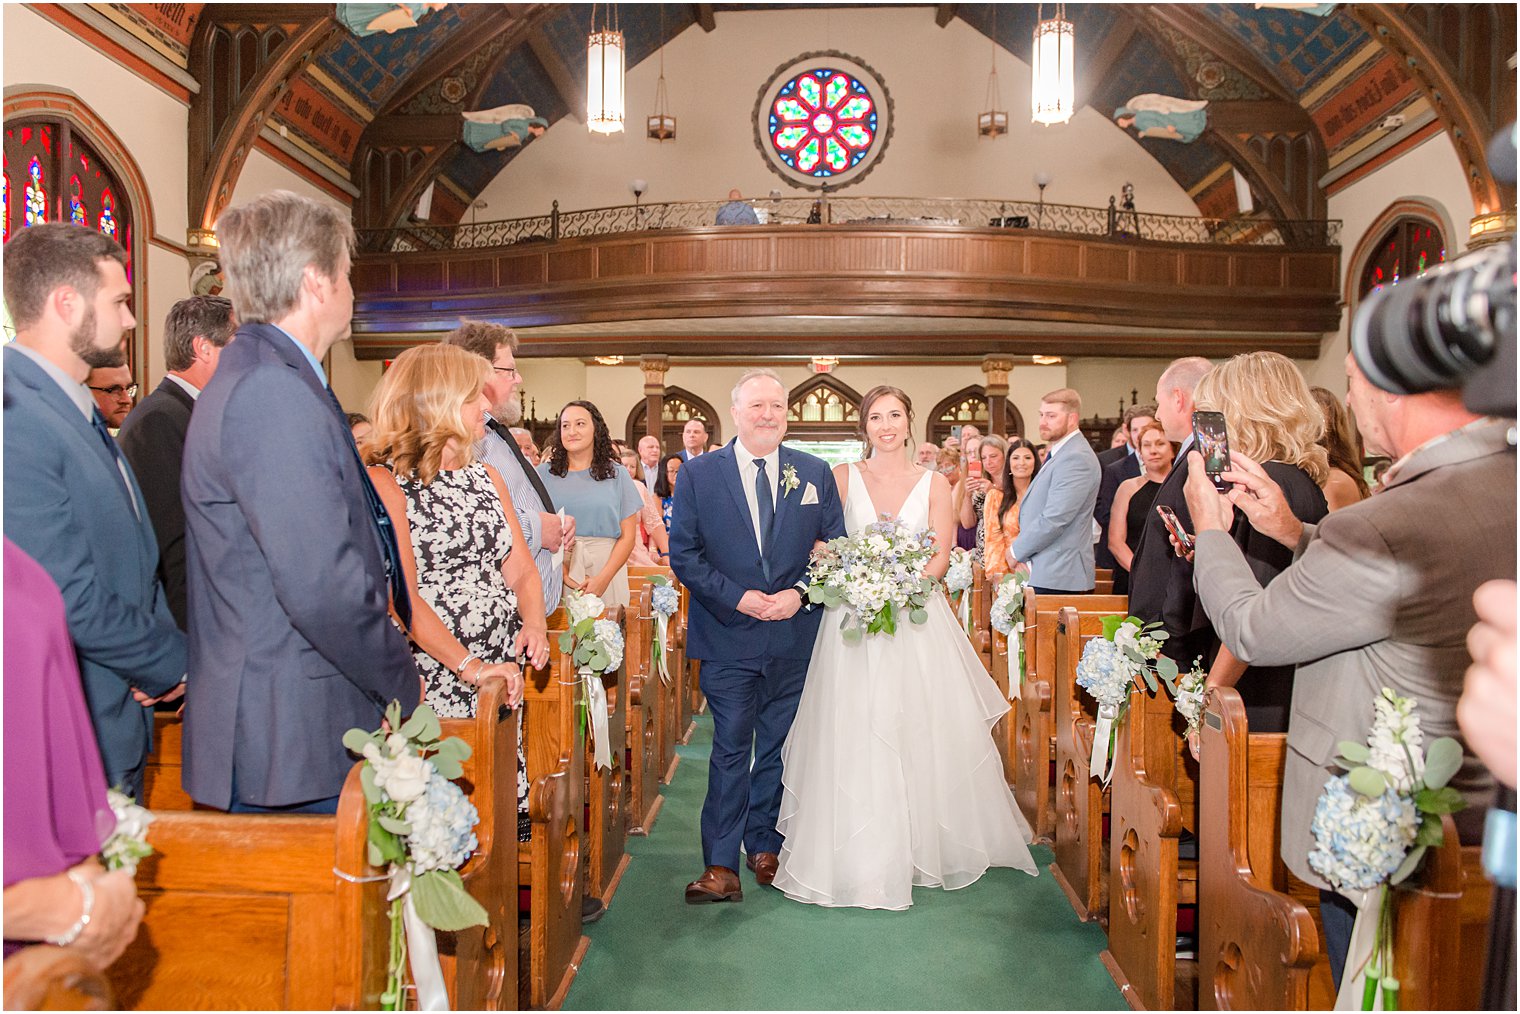 bride walks with father down aisle for traditional church wedding ceremony at St. Peter's Church